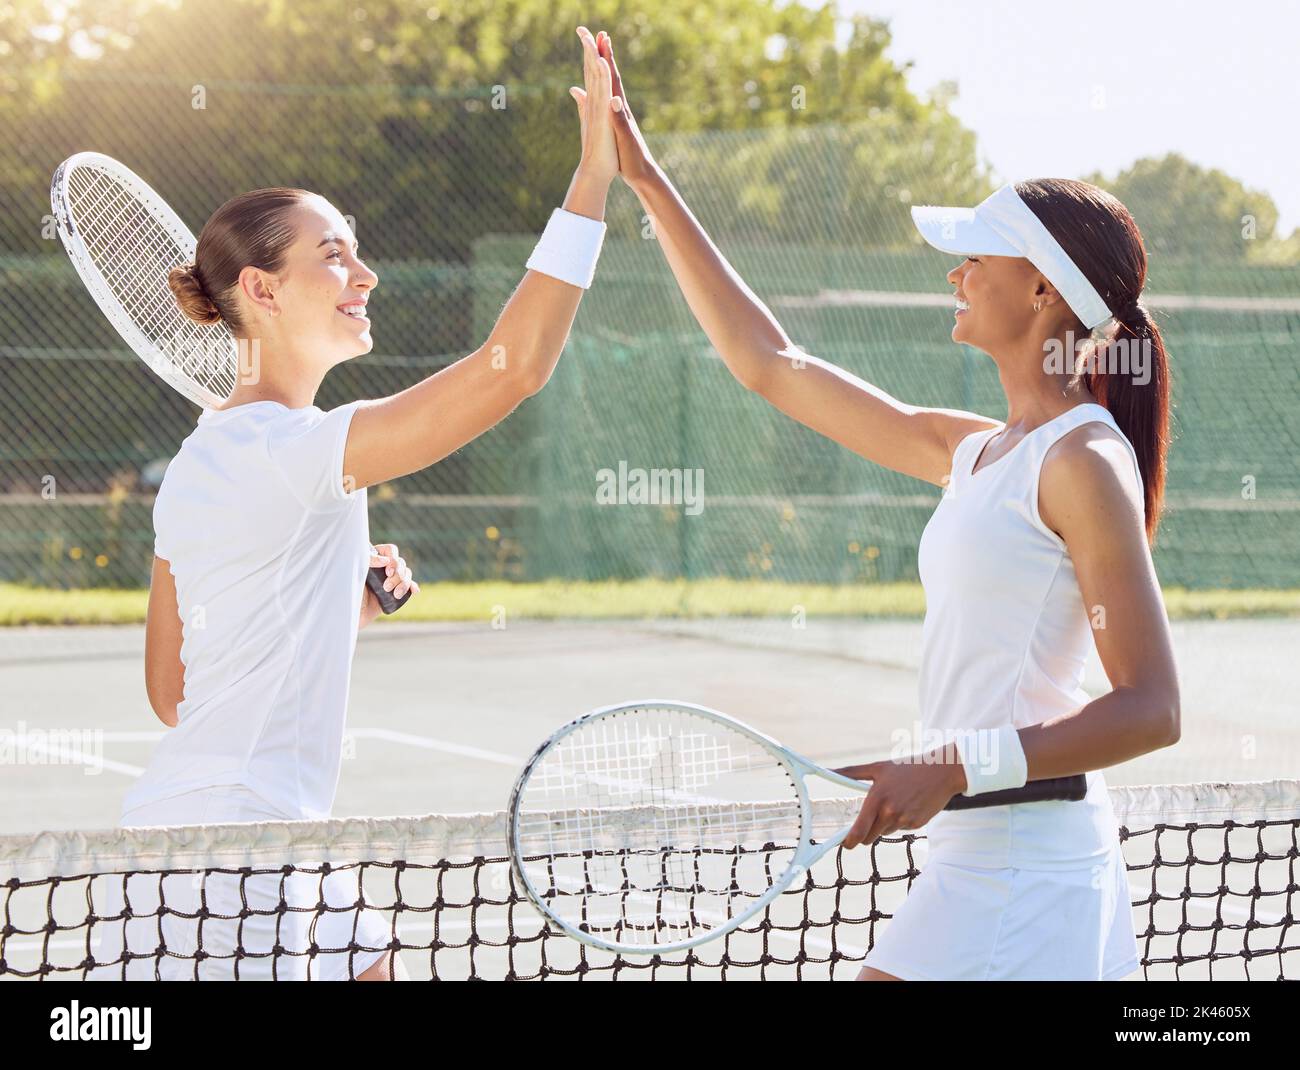 Tennis, woman and high five for sport, fitness match training or exercise workout at the court in the outdoors. Happy women friends in sports Stock Photo